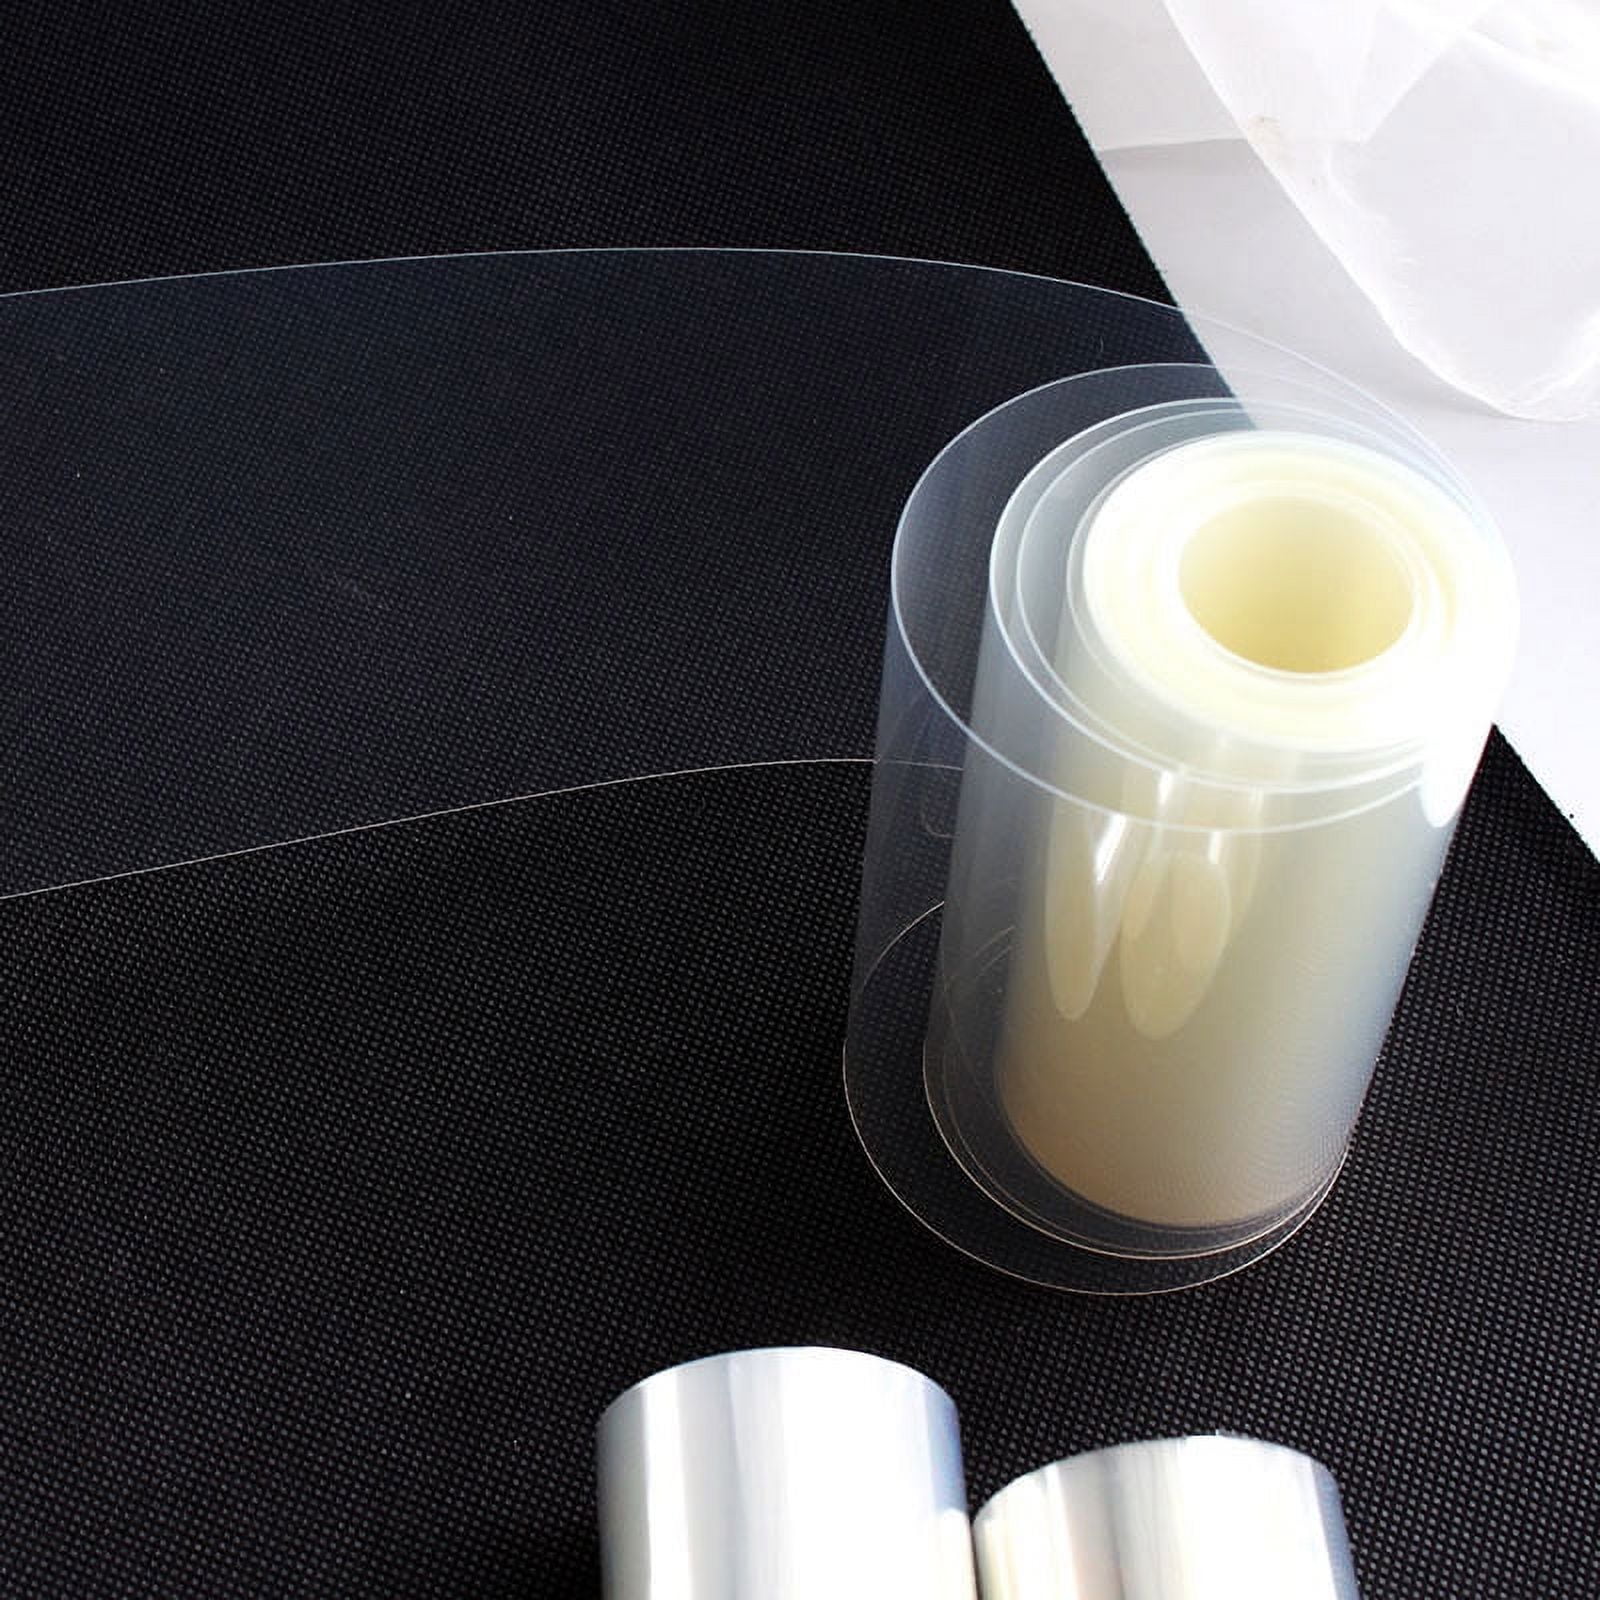 plastic cake wrap 3 inch clear transparent colors PET plastic Band Strip  wrapping wrapper roller around cakes outside